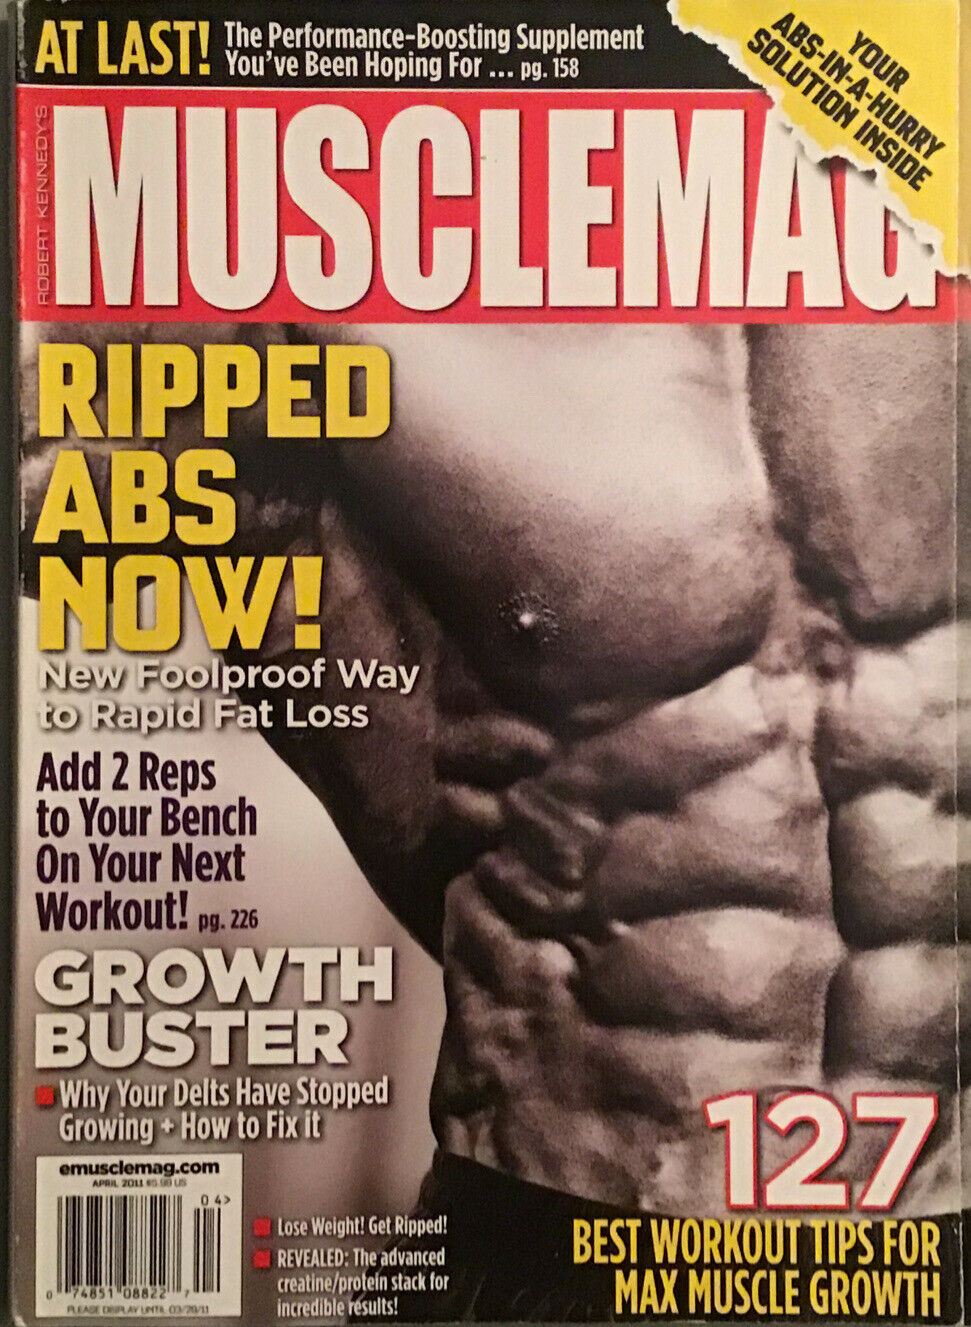 Muscle Mag April 2011 magazine back issue Muscle Mag magizine back copy Muscle Mag April 2011 Bodybuilding and Fitness Magazine Back Issue Published by Canadian Robert Kennedy and Founded in 1974. At Last! The Performance-Boosting Supplement You've Been Hoping For....